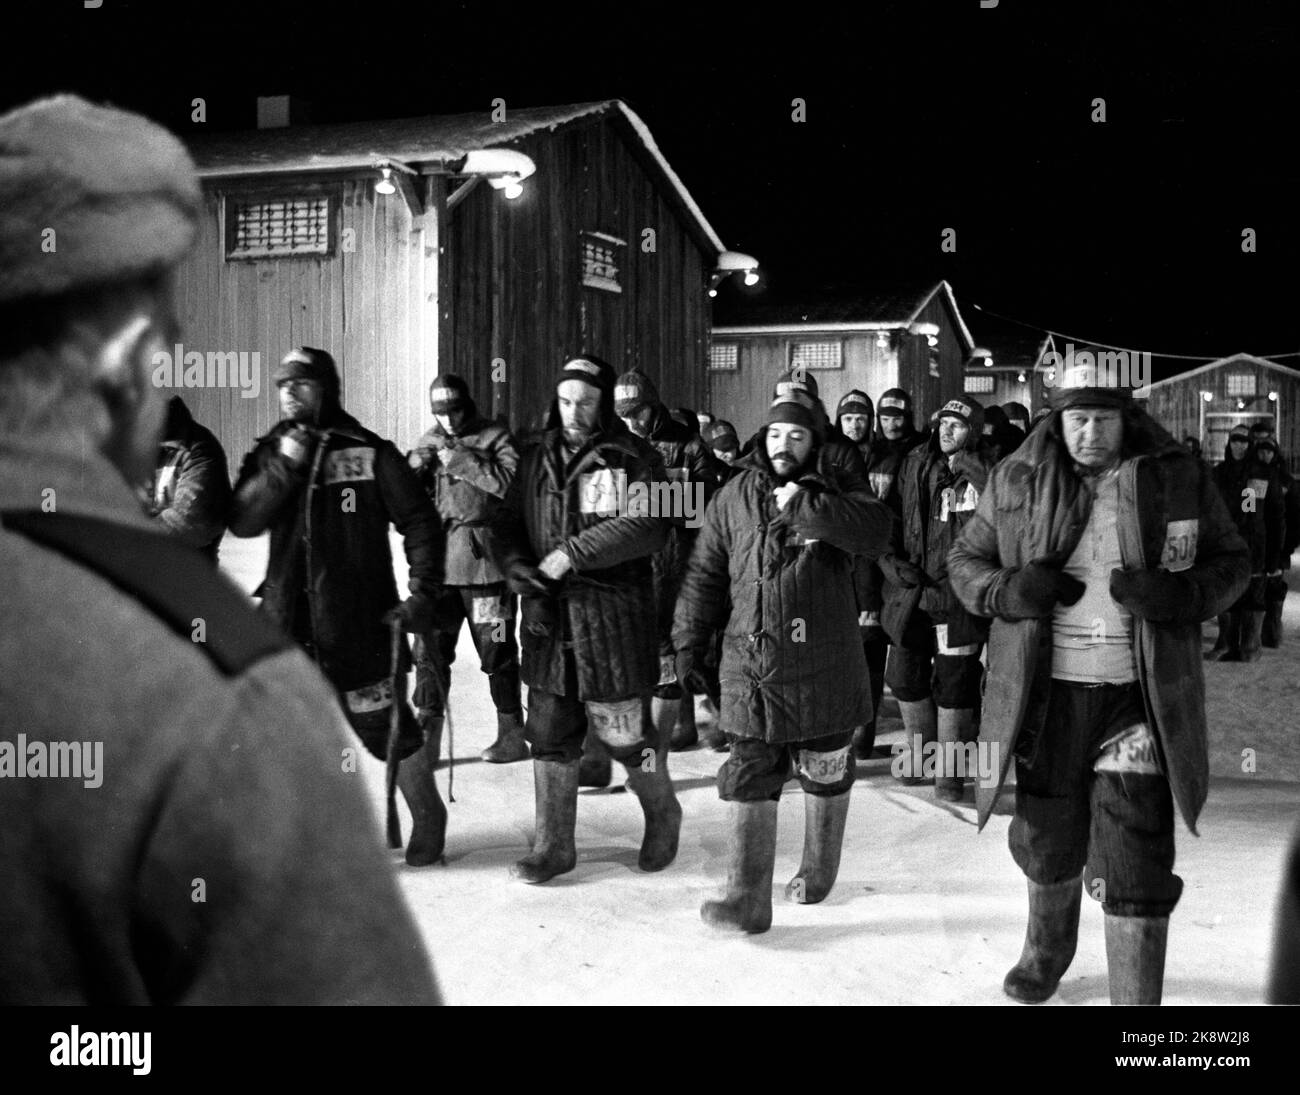 Oslo 19700110 Recording of the movie 'One day in Ivan Denisovich Life' takes place at Røros. Here is a scene from the movie, the prisoners on the march against the guards for checking. From v. The British John Cording (Pavio), Espen Skjønberg (Tiurin), Eric Thompson (Tsesar) and Frimann Falck Clausen (Senka). The camp management had a msitic that the prisoners were wearing more clothes than the regulations allowed, and therefore they were investigated. Photo: Photo: Sverre A. Børretzen / Current / NTB Stock Photo